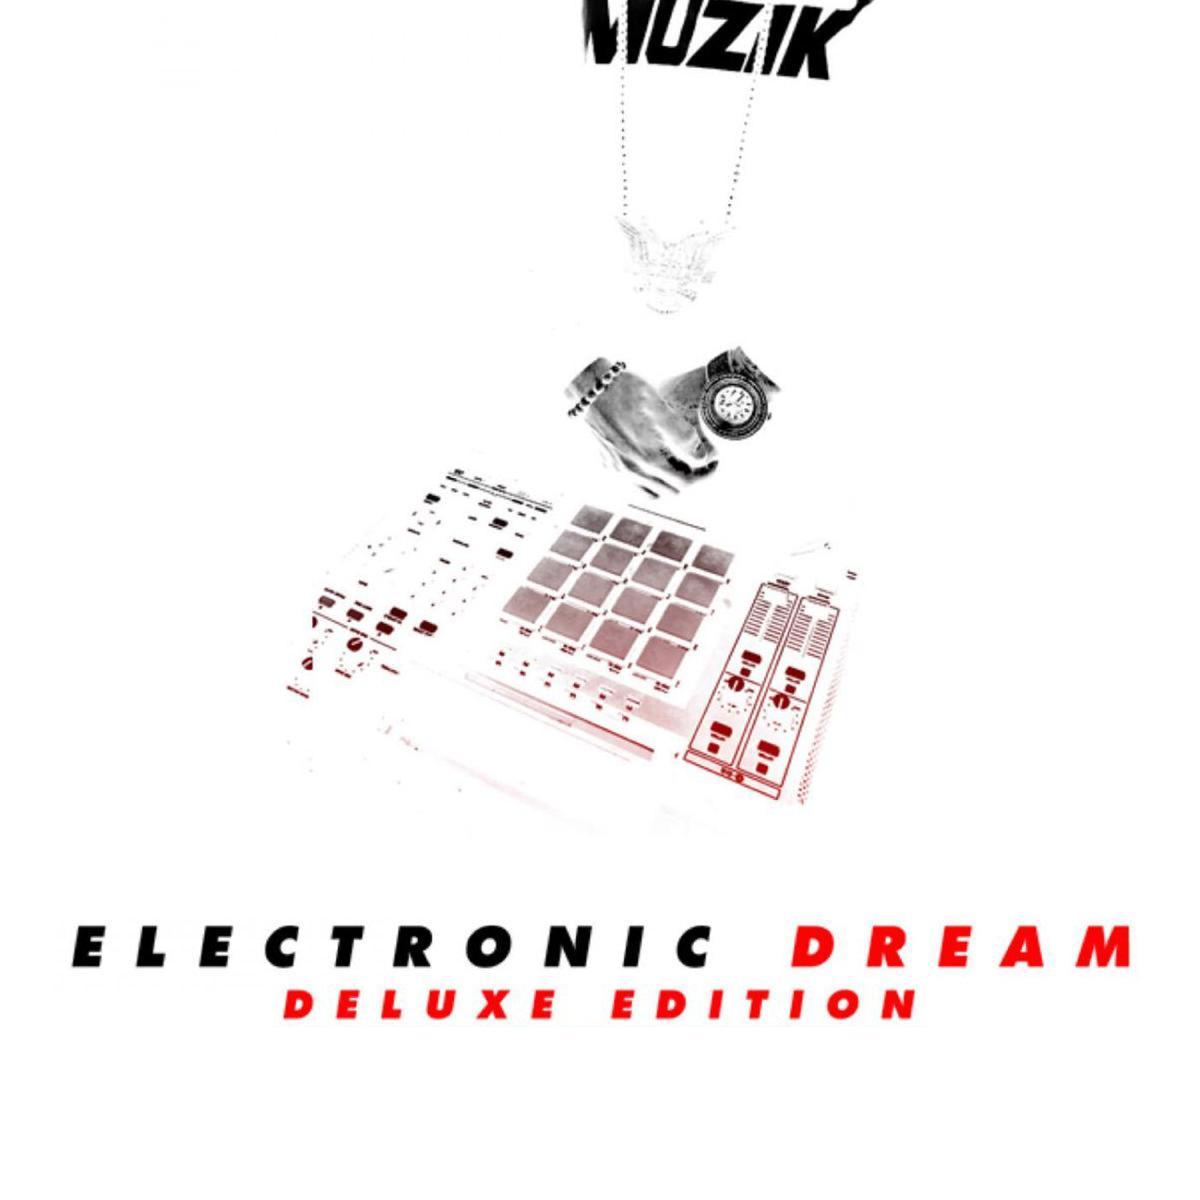 Cover of Electronic Dream Deluxe Edition